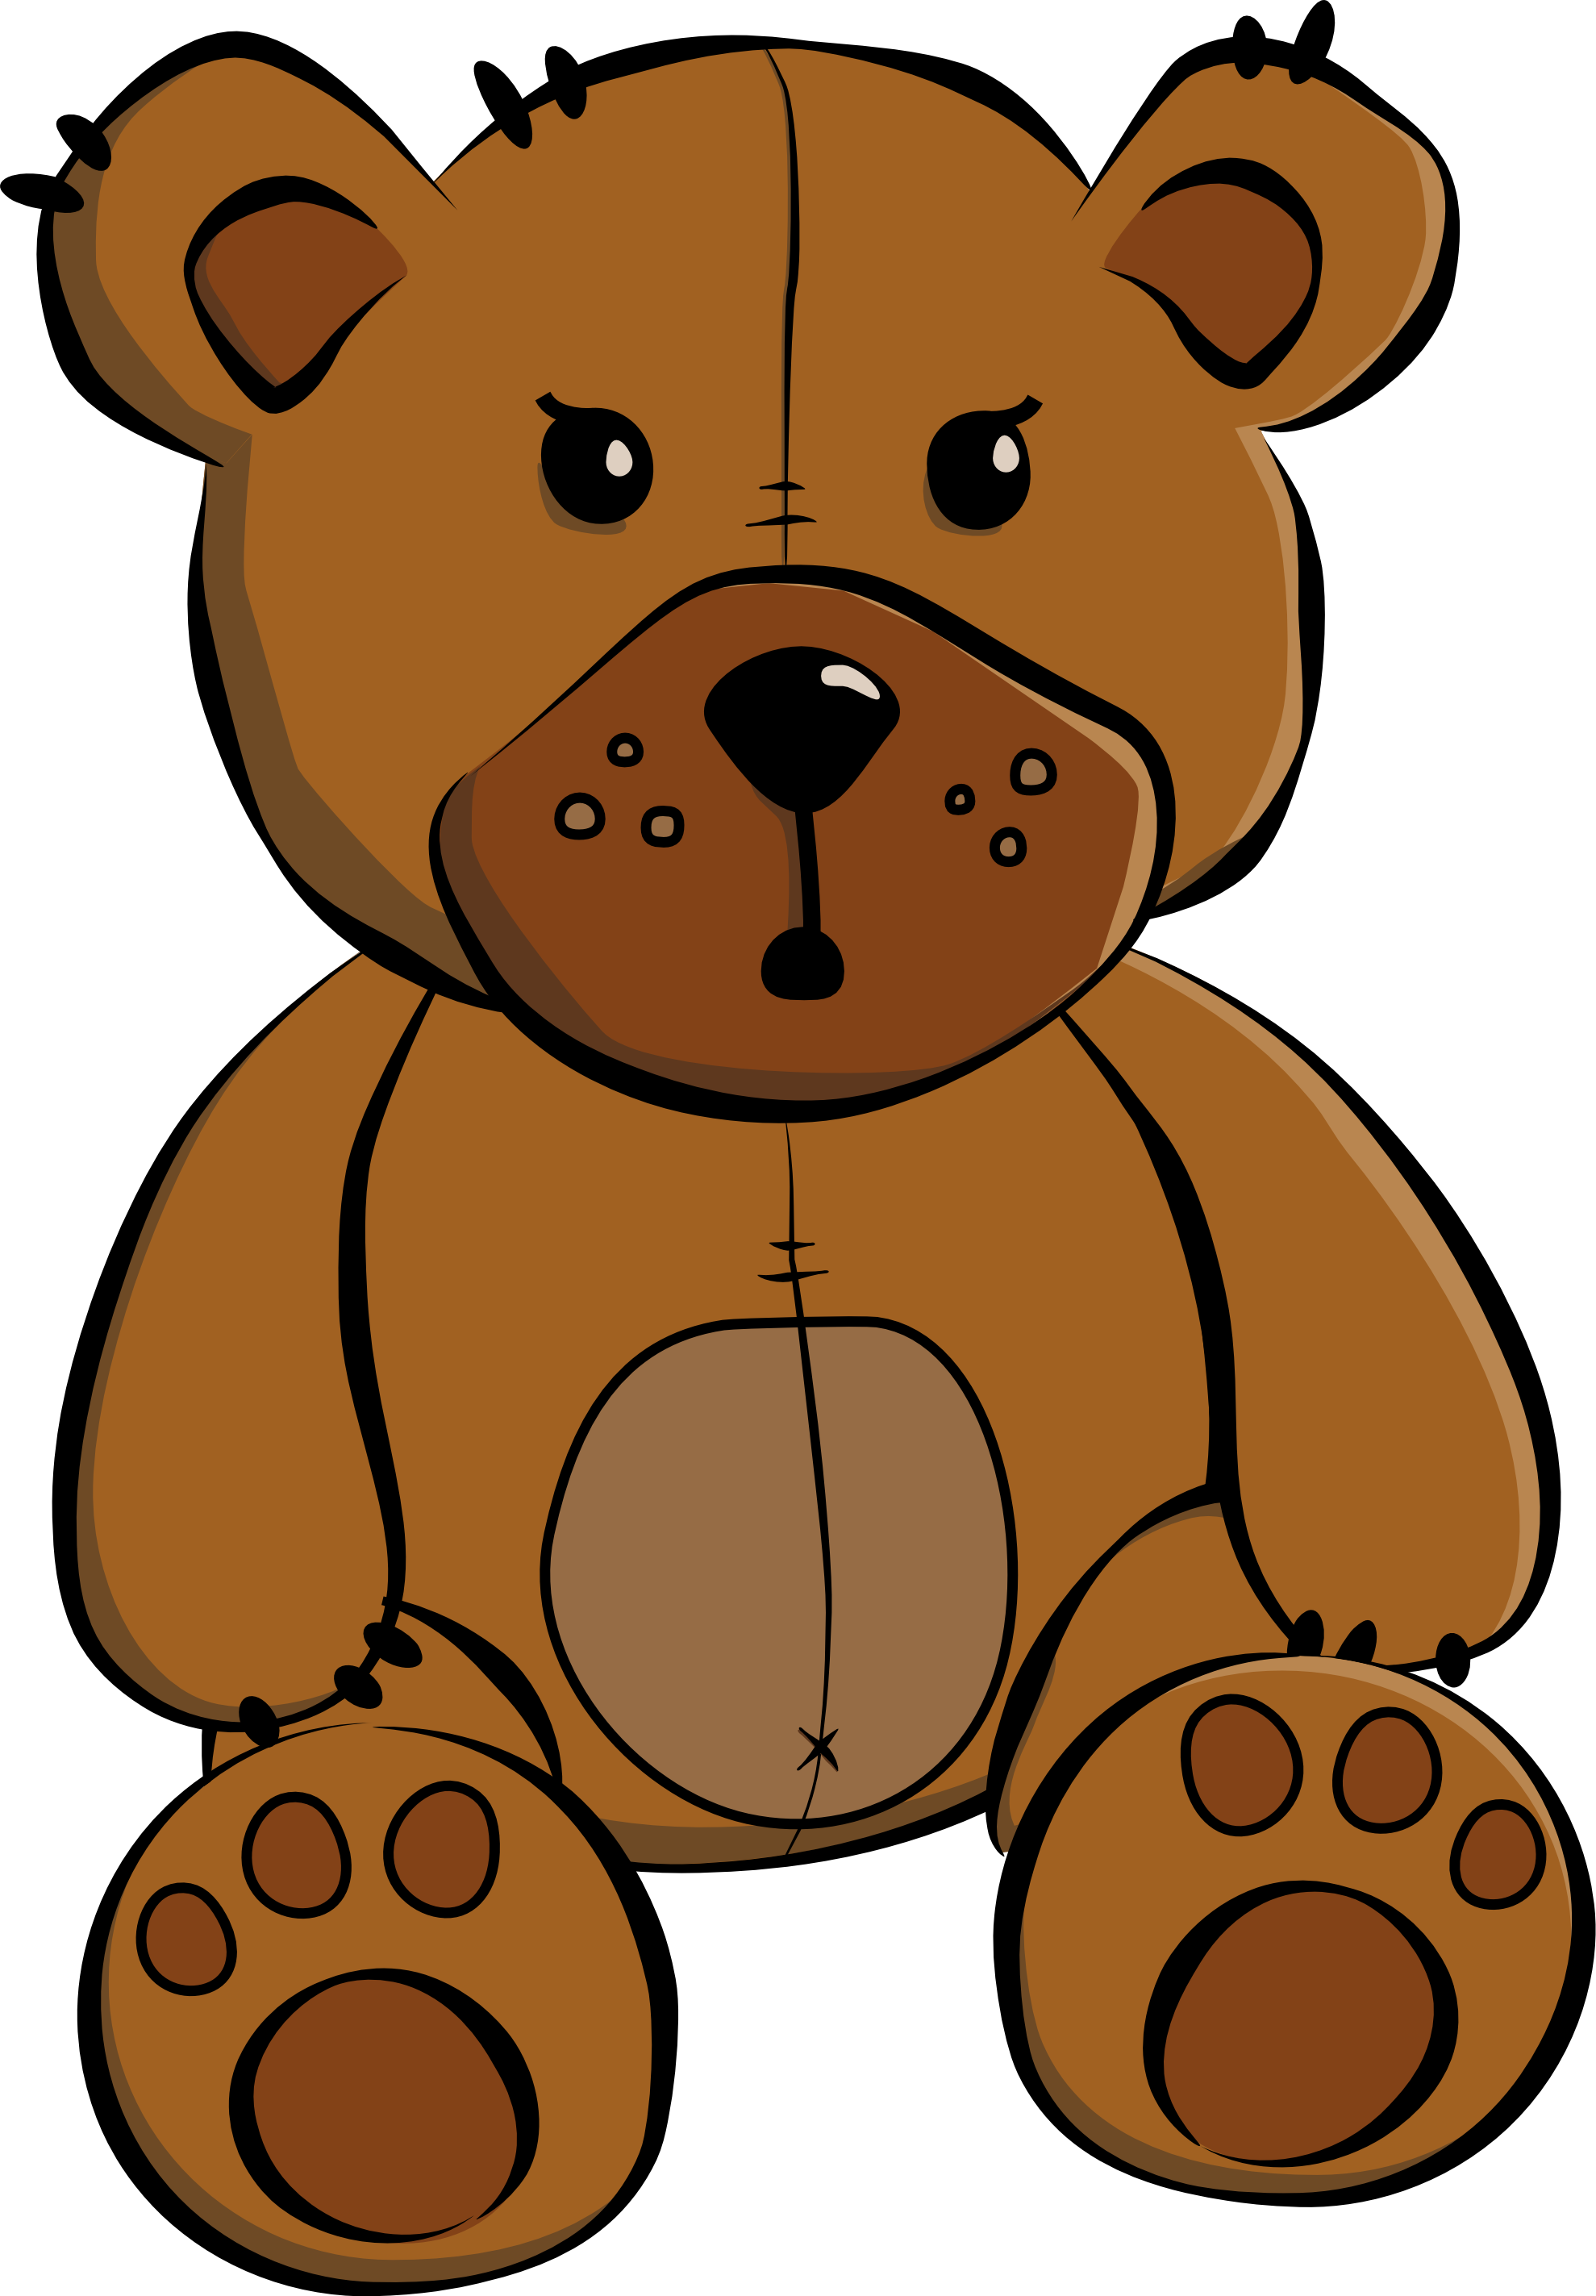 Free Teddy Bear Cartoon Picture, Download Free Clip Art, Free Clip Art on Clipart Library